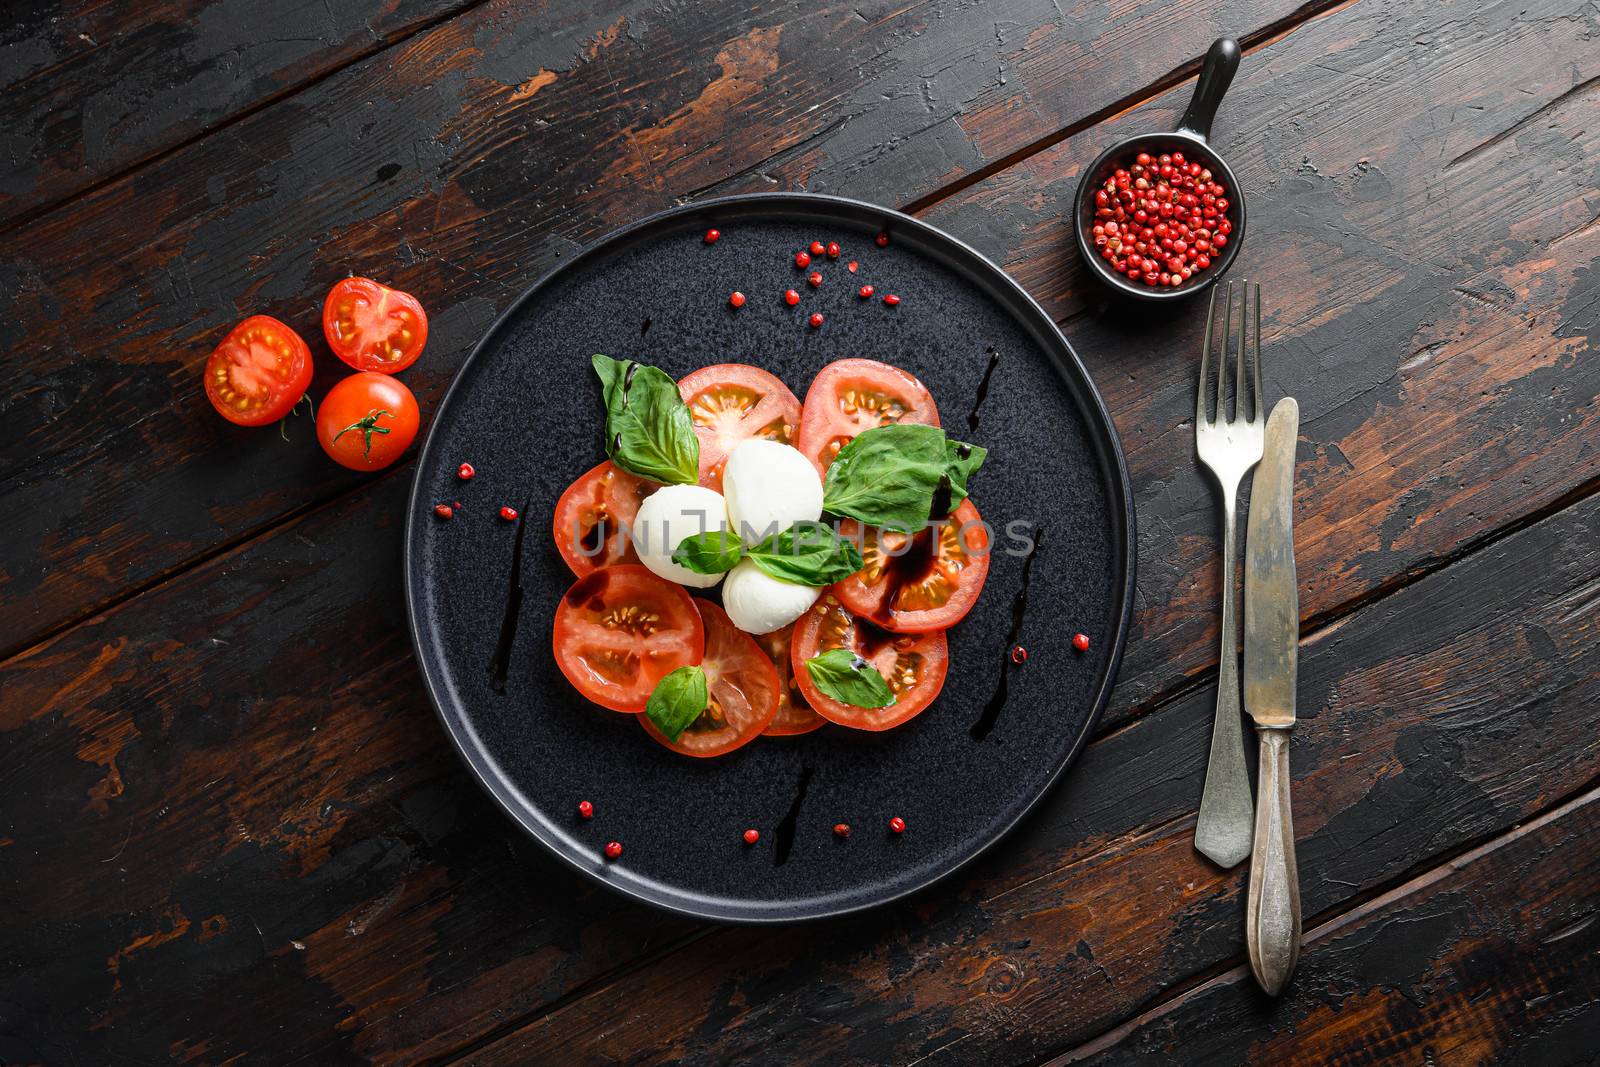 Tomato, basil, mozzarella Caprese salad with balsamic vinegar and olive oil. old wooden planks background over head top view.